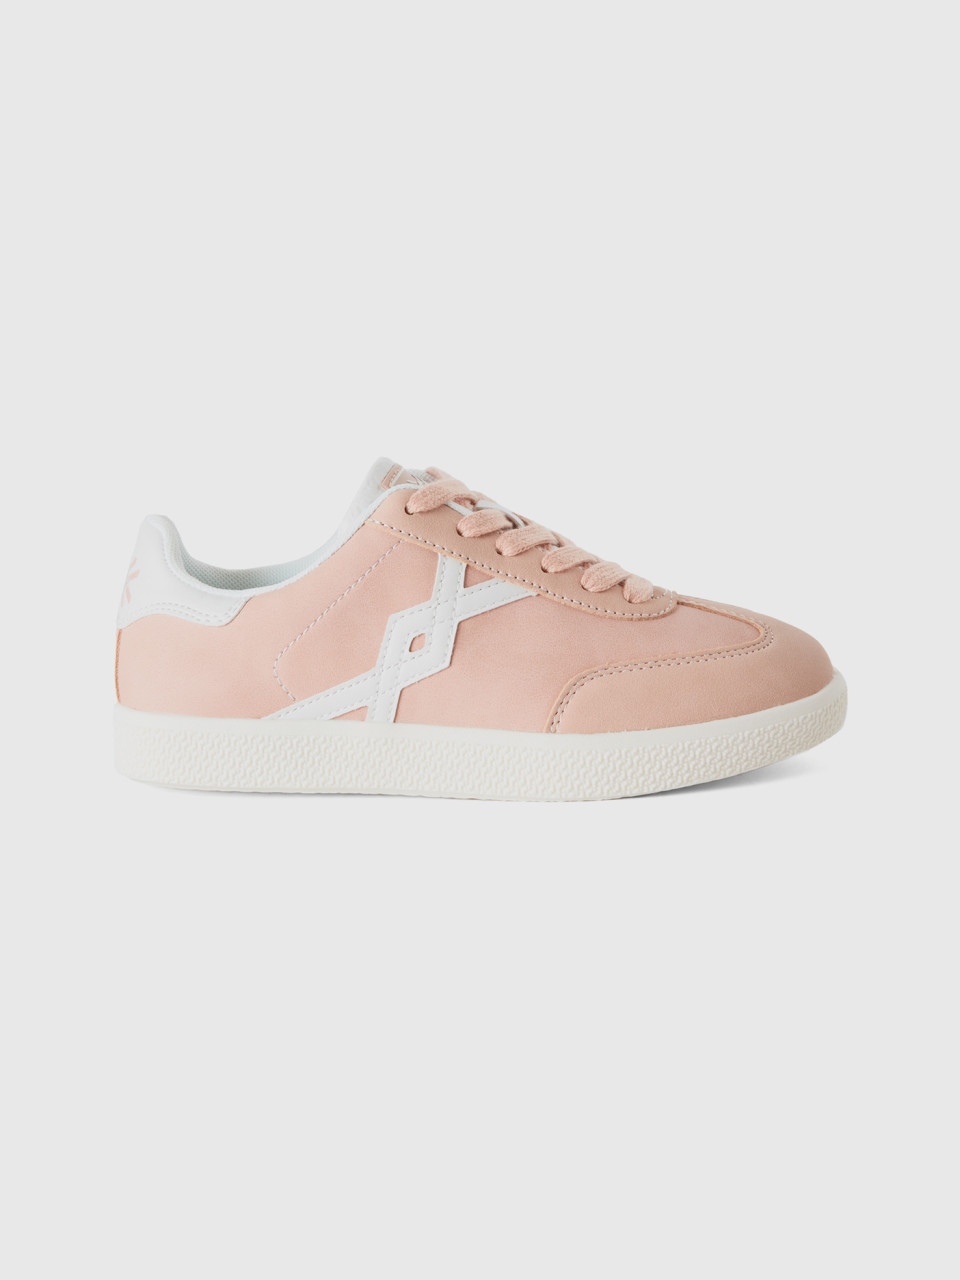 Benetton, Sneakers In Imitation Leather, Soft Pink, Kids